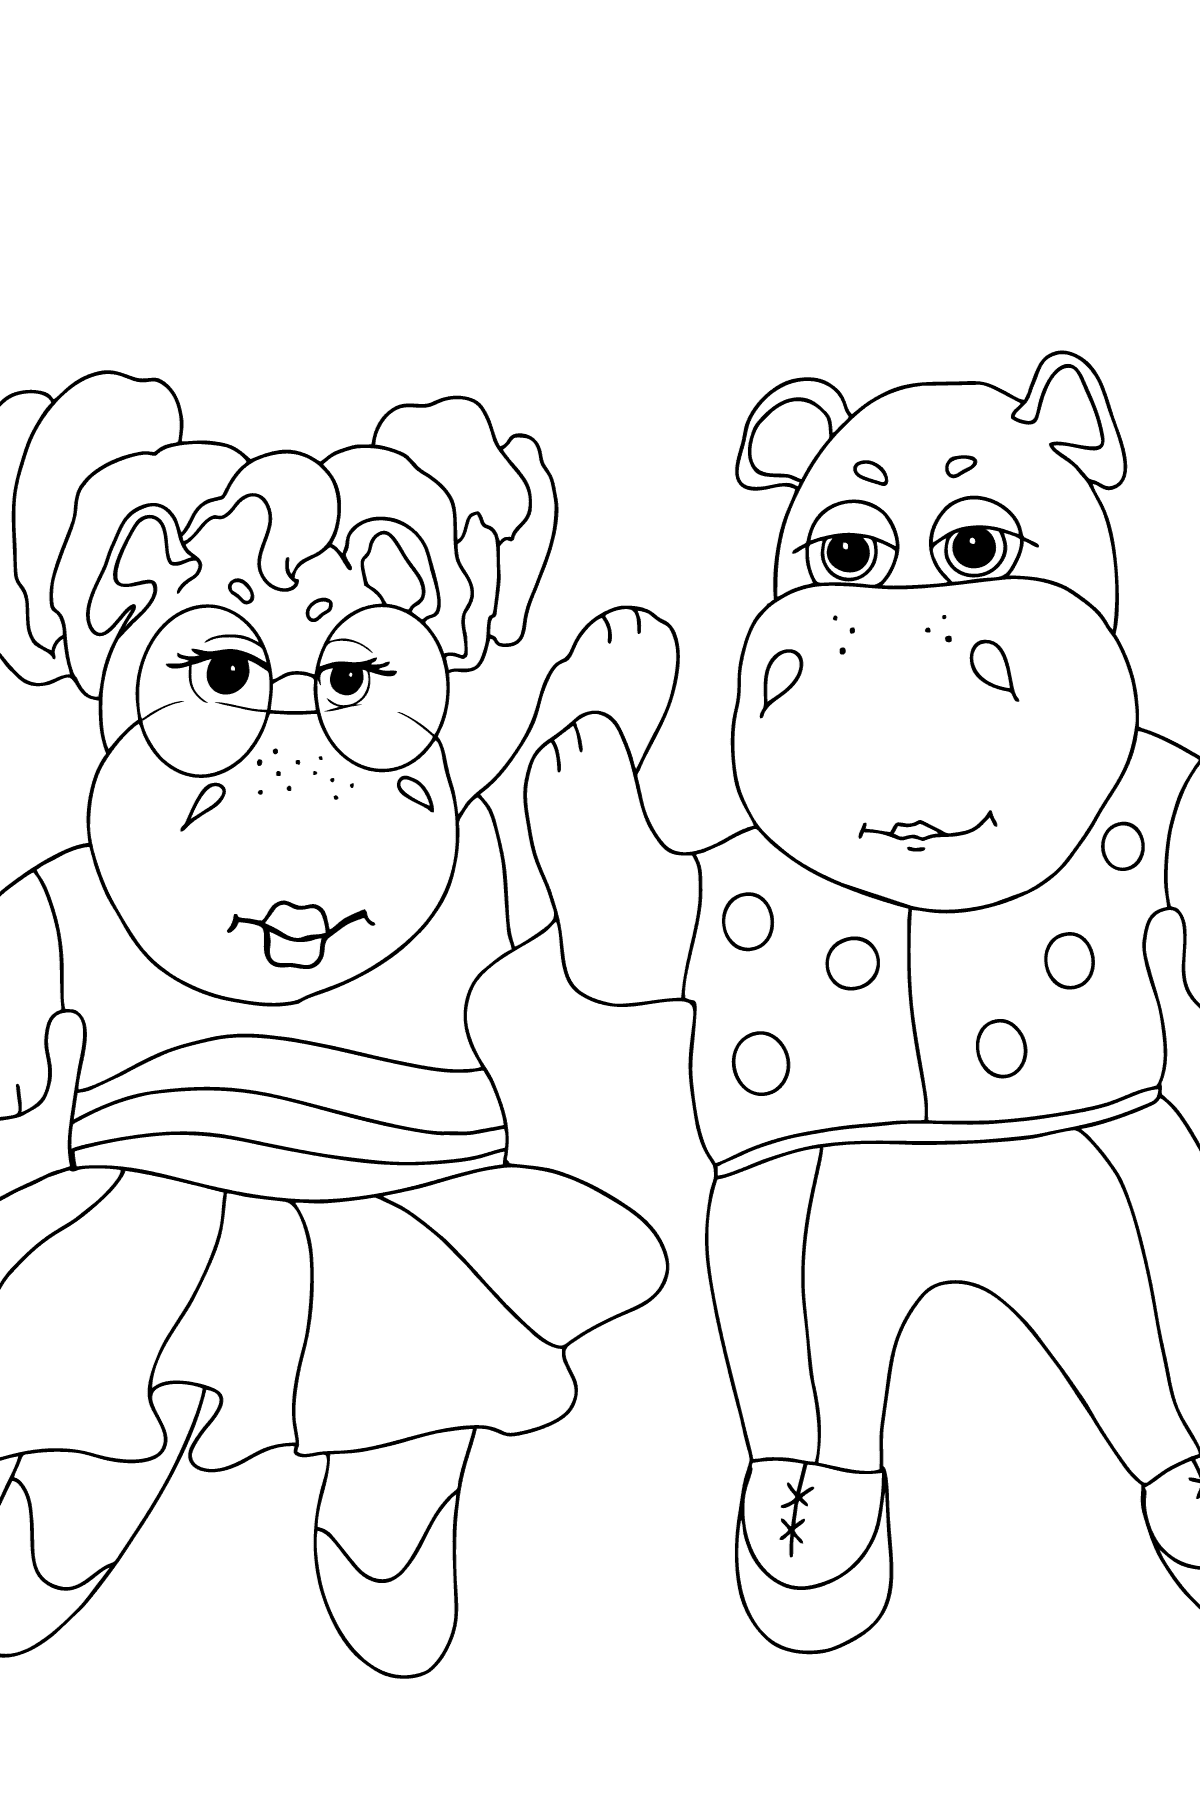 Dancing Hippos (hard) coloring page - Coloring Pages for Kids